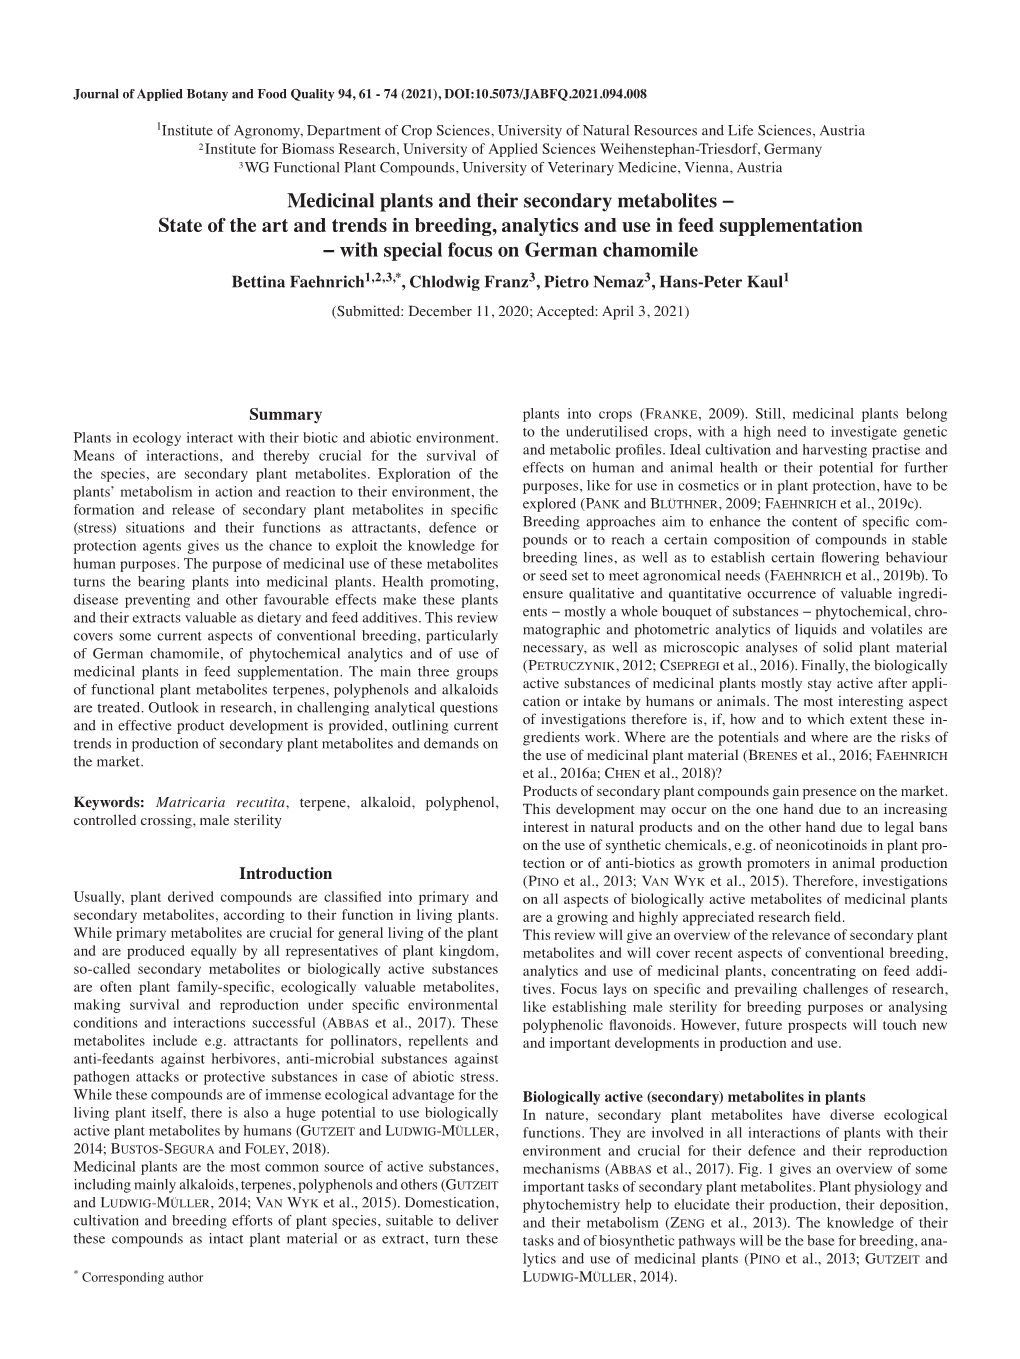 Medicinal Plants and Their Secondary Metabolites − State of the Art And